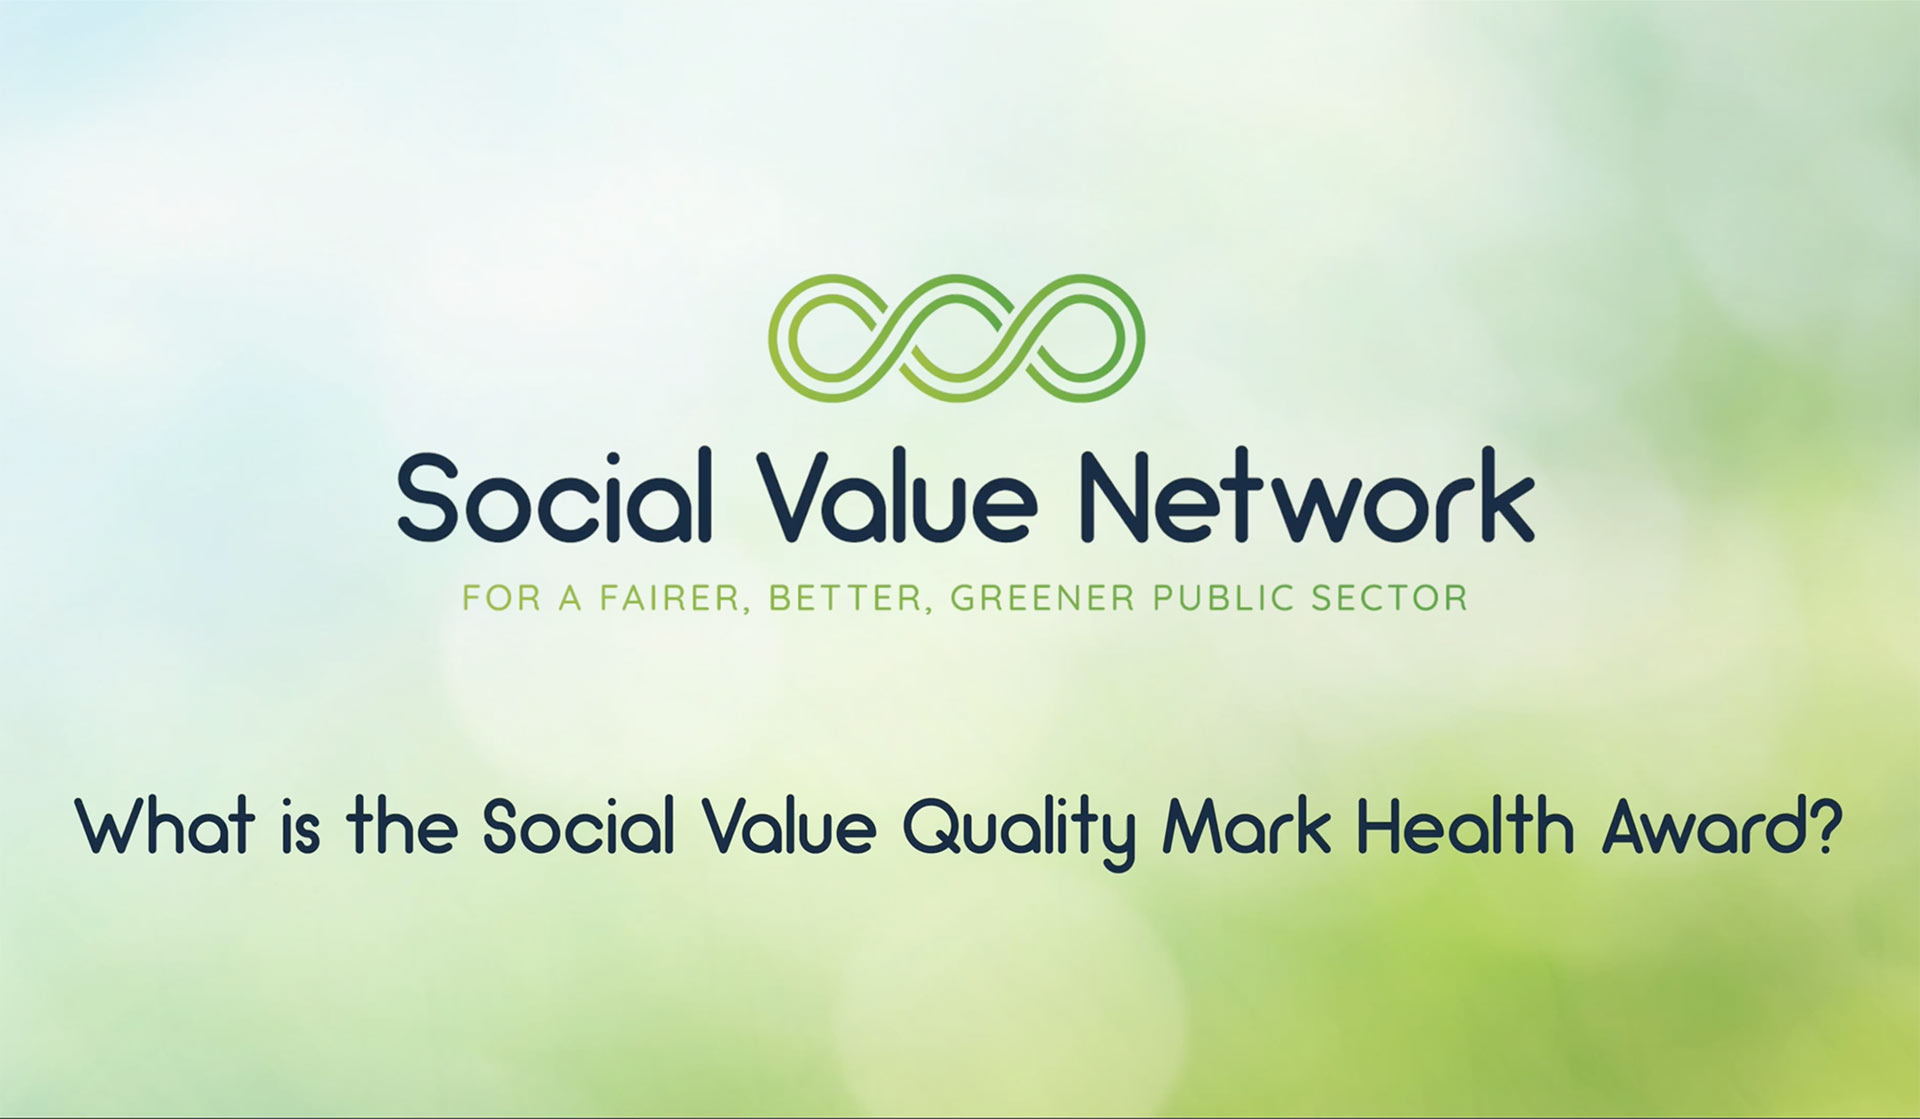 What is the Social Value Quality Mark Health Award?